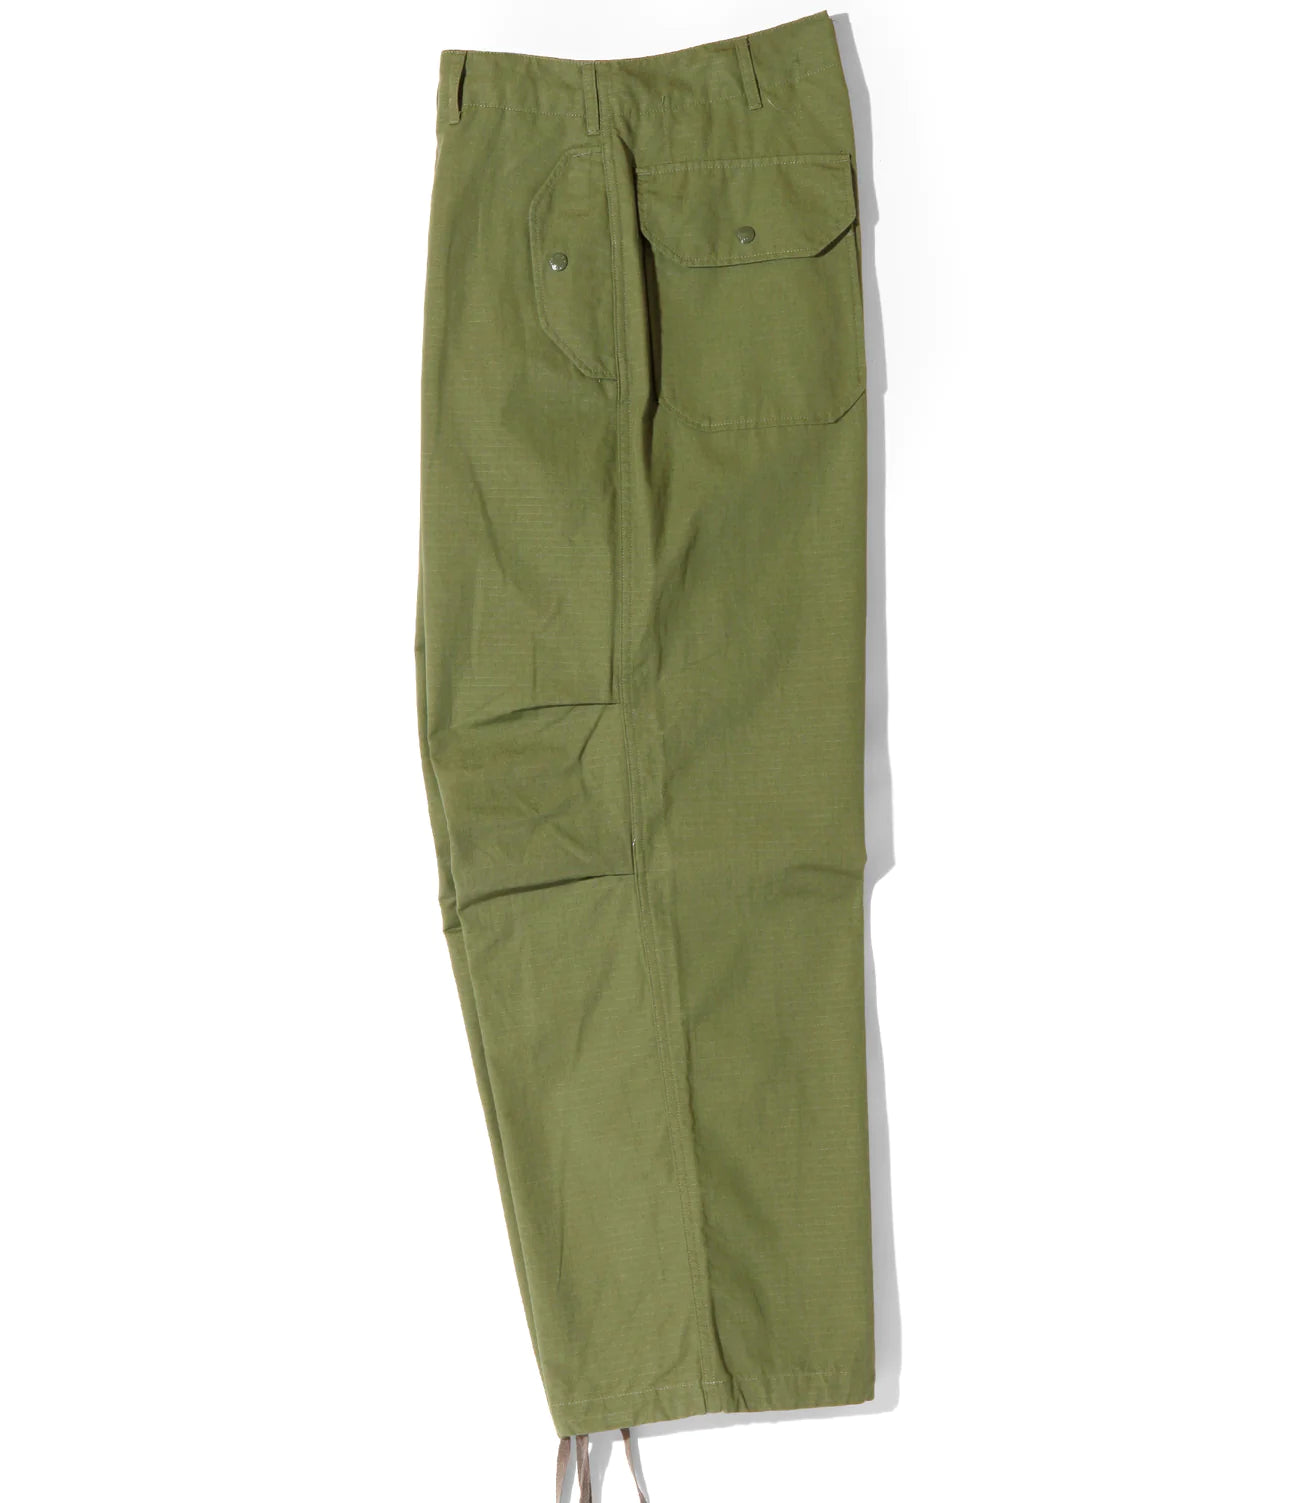 Engineered Garments Green Over Trousers